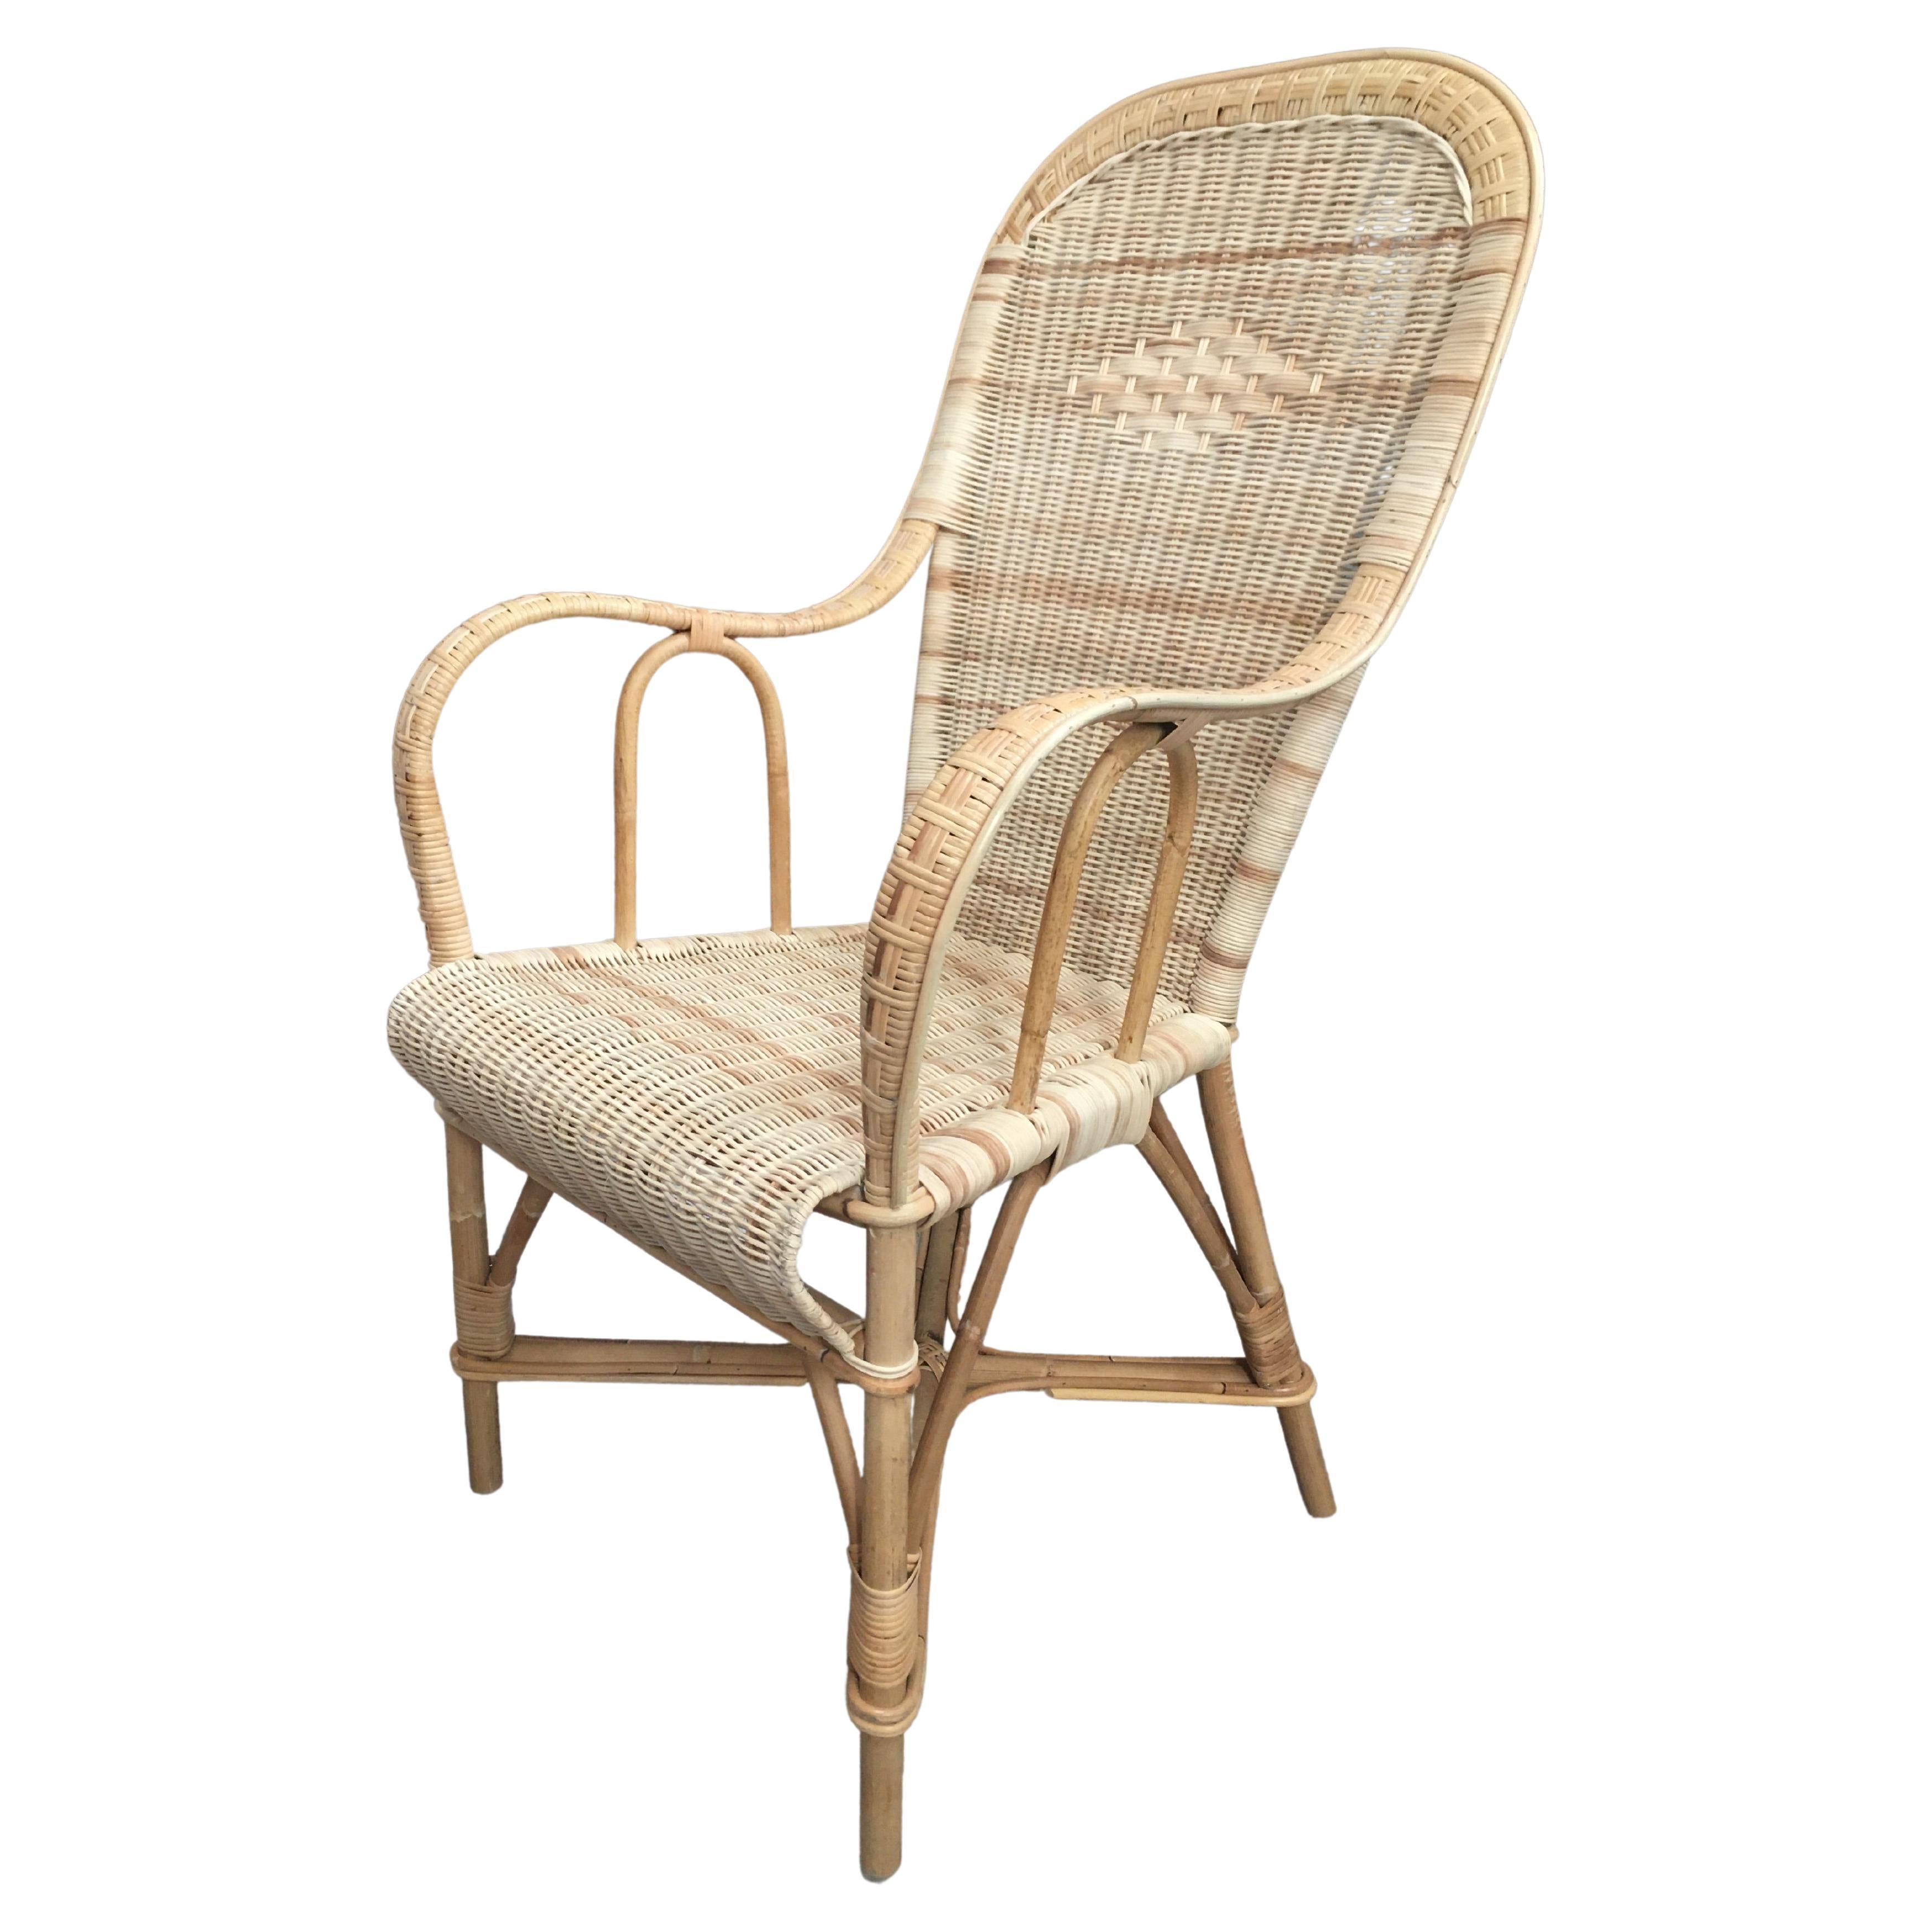 French 1900s Design Rattan and Braided Rattan Wicker Cane Armchair For Sale